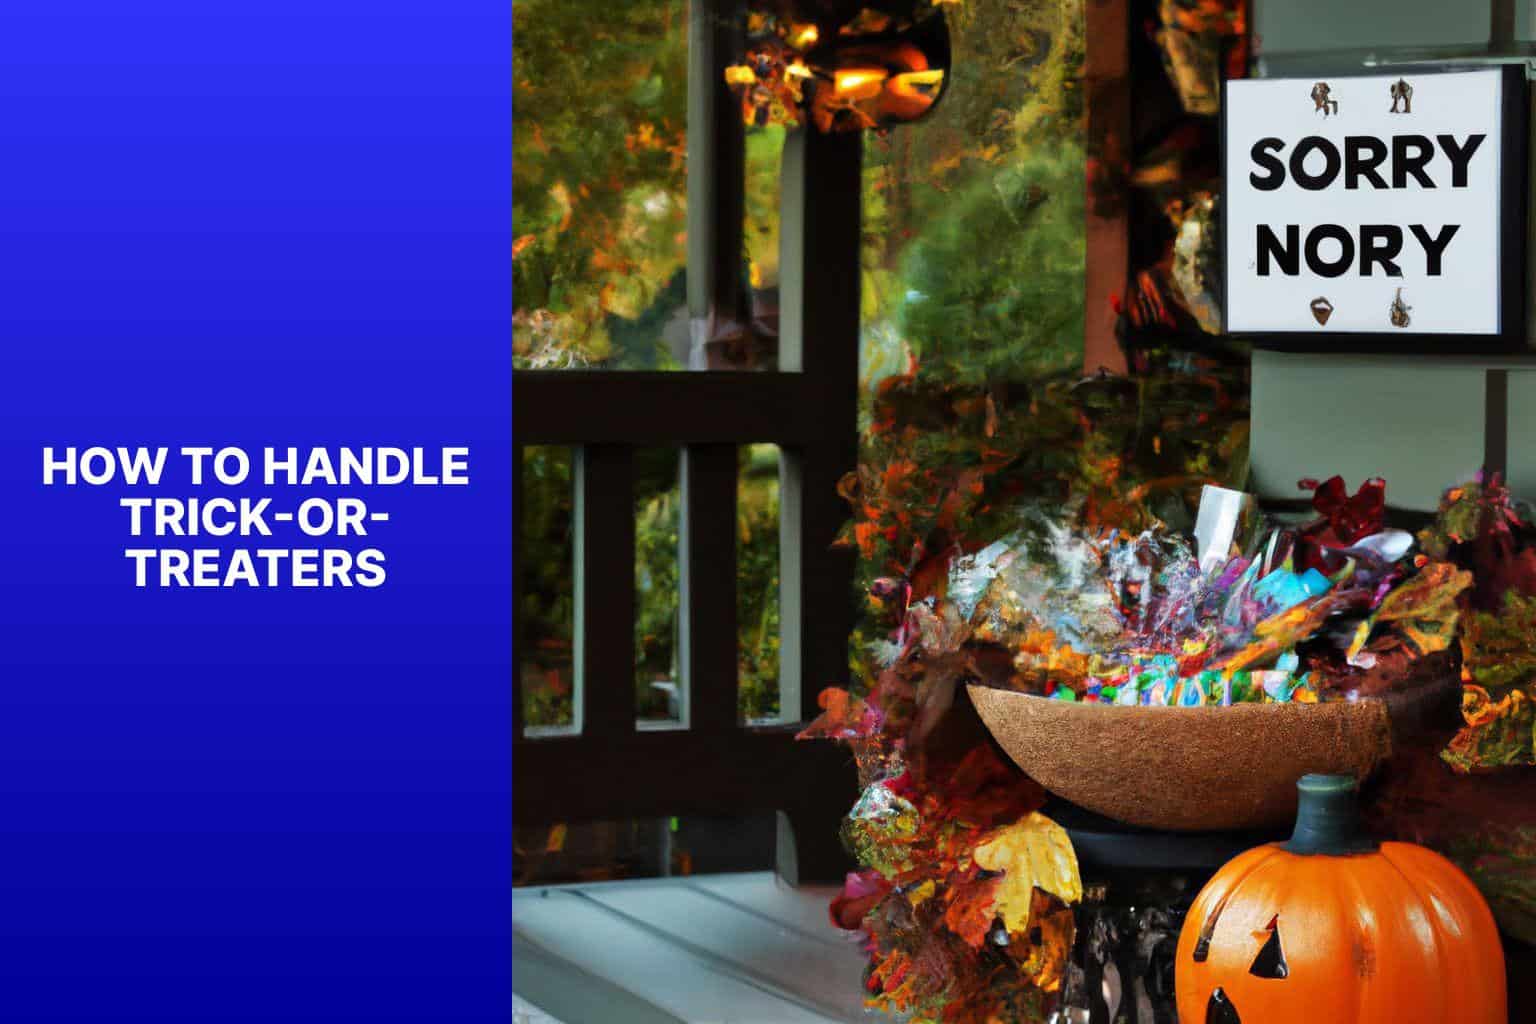 How to Handle Trick-or-Treaters - what to do on halloween if you don